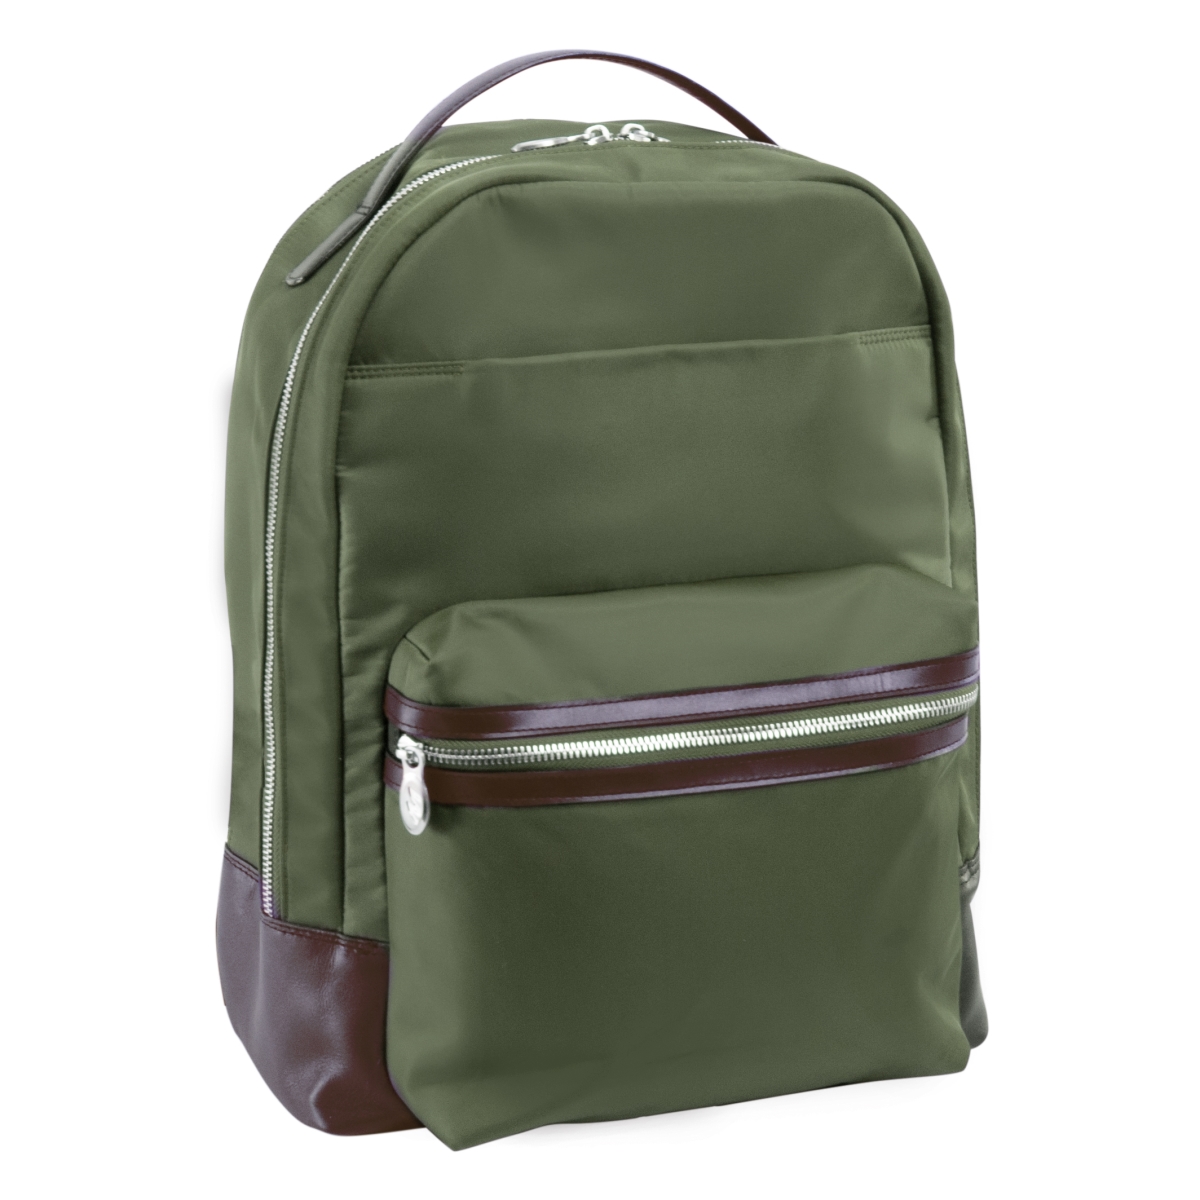 Mcklein Usa 18551 15 In. Parker Nylon Dual Compartment Laptop Backpack, Green